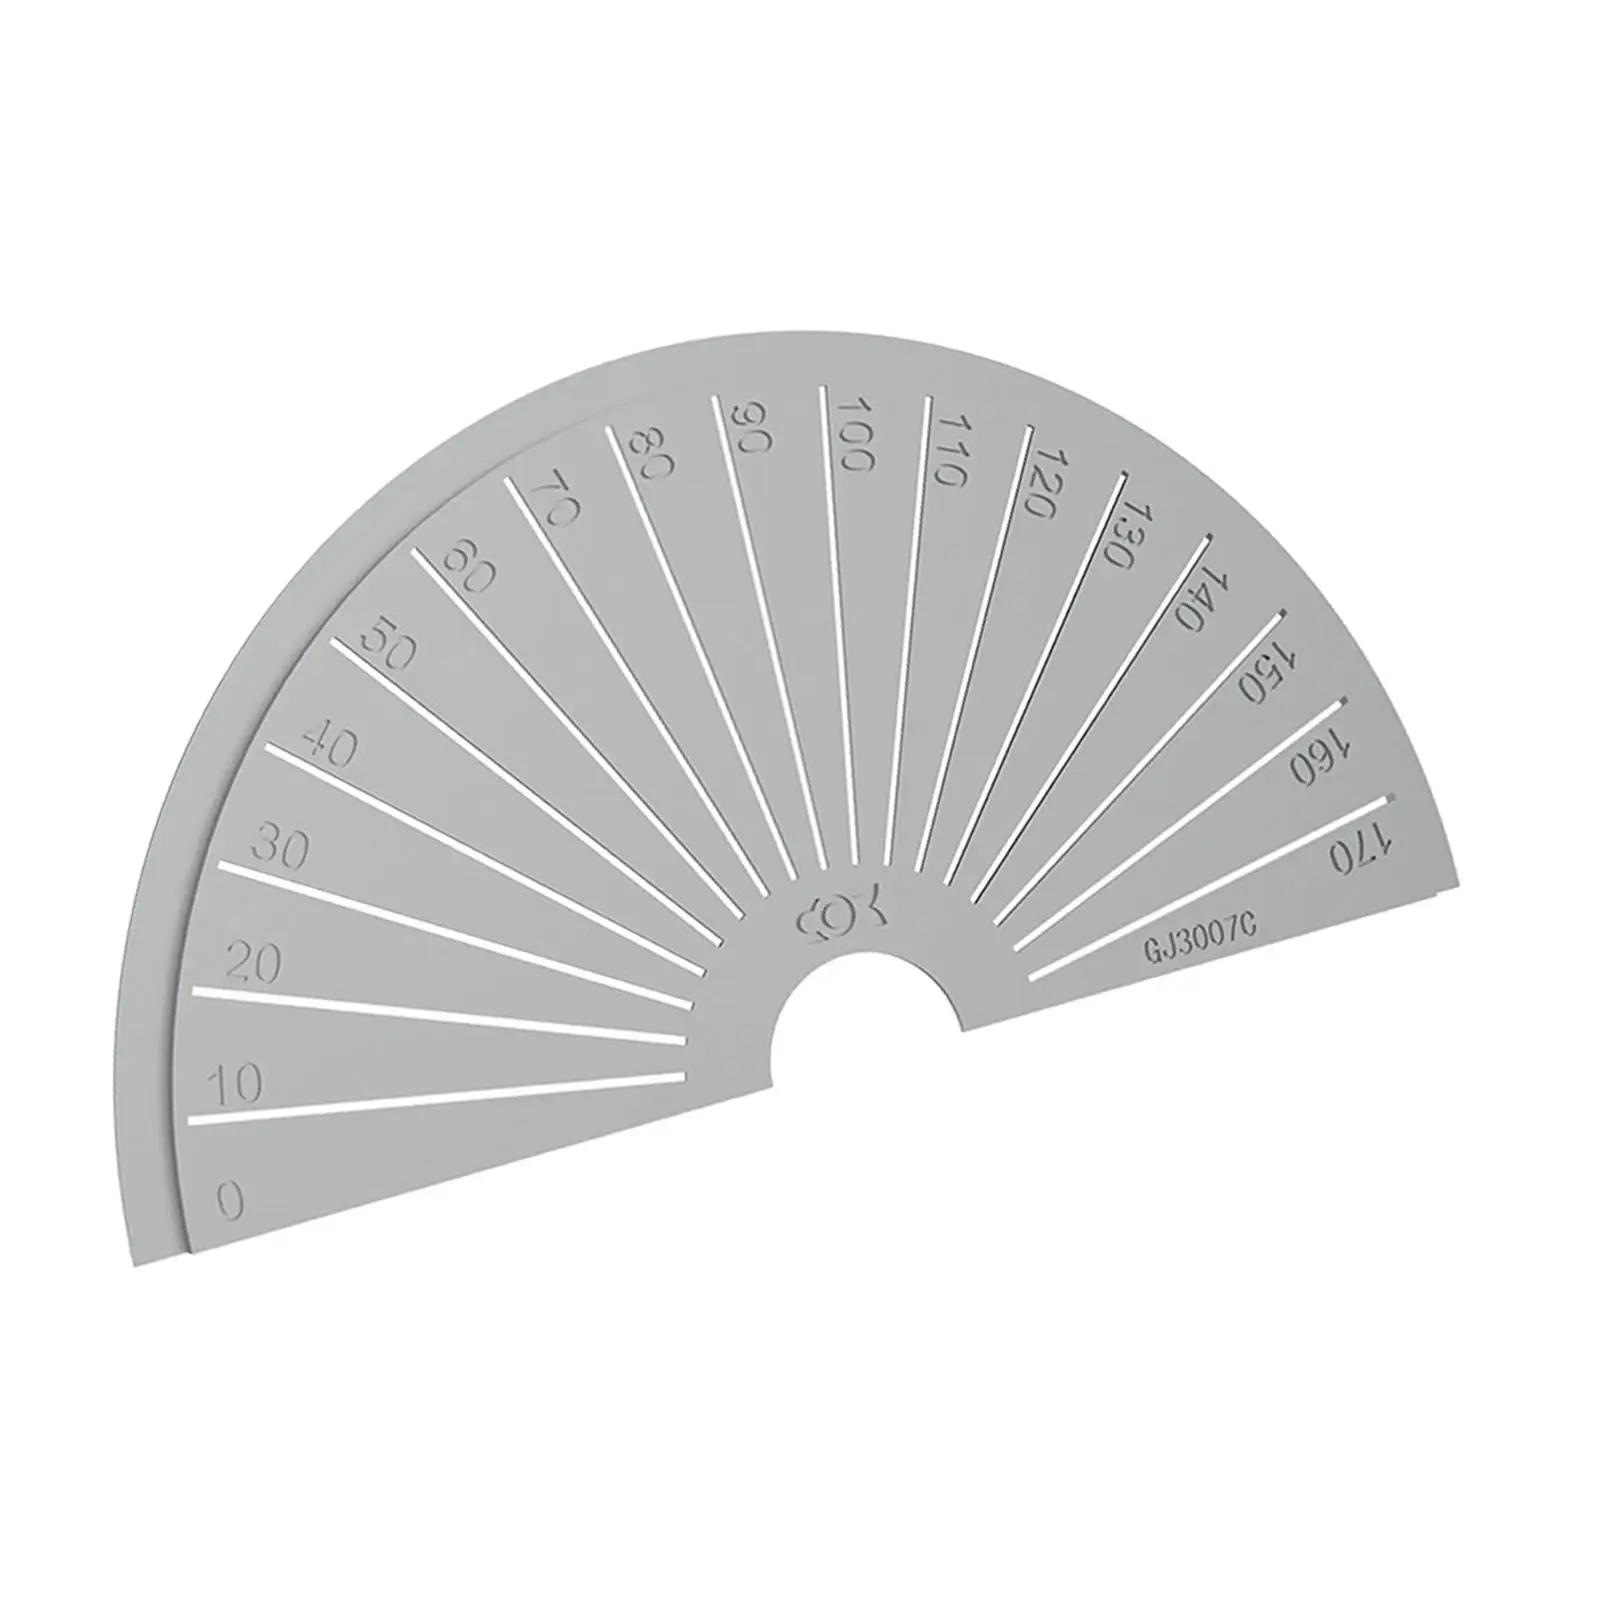 Stainless Steel Protractor Model Parts Universal 3.15`` Measuring Round Head Protractor for Drawing Model Prop Angle Measurement